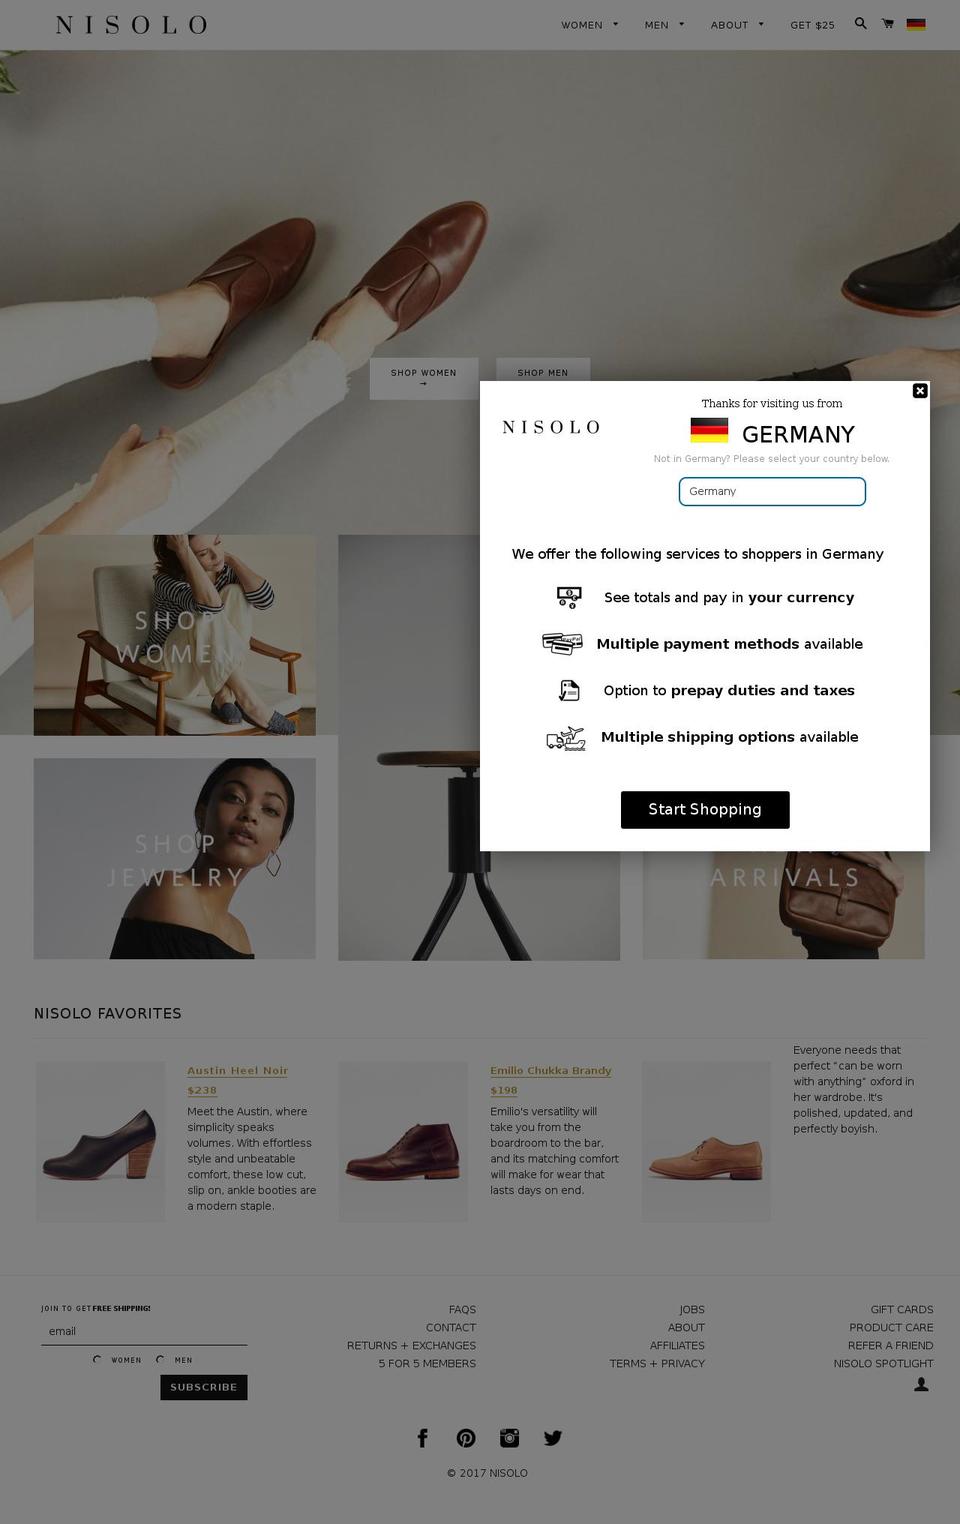 PS Nisolo - . Shopify theme site example nisoloshoes.com